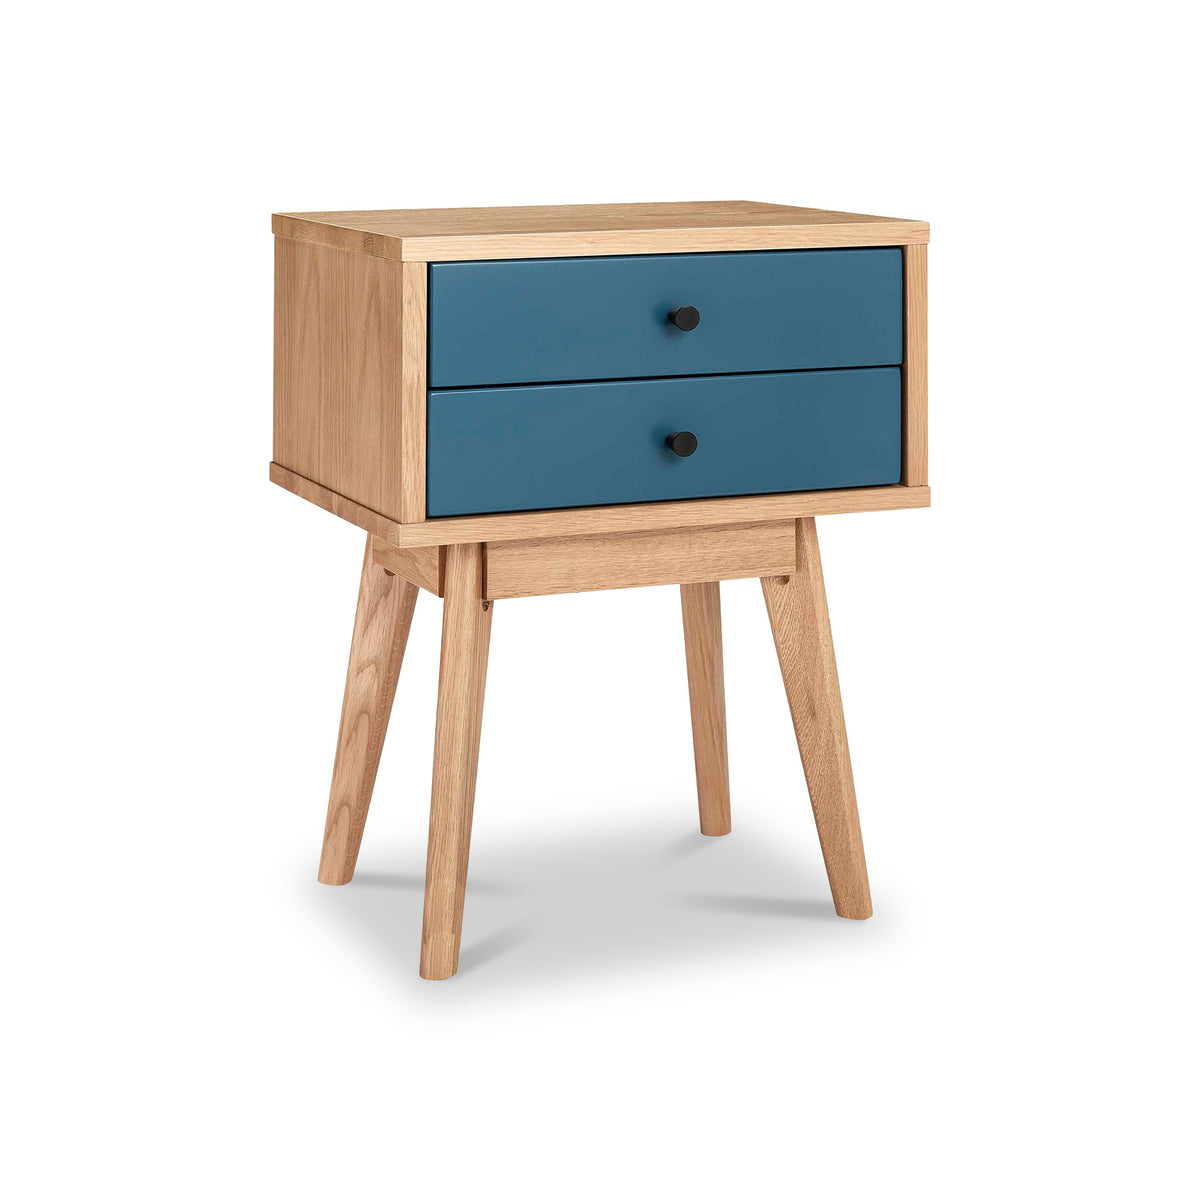 Aubrey Navy 2 Drawer Bedside Table from Roseland Furniture